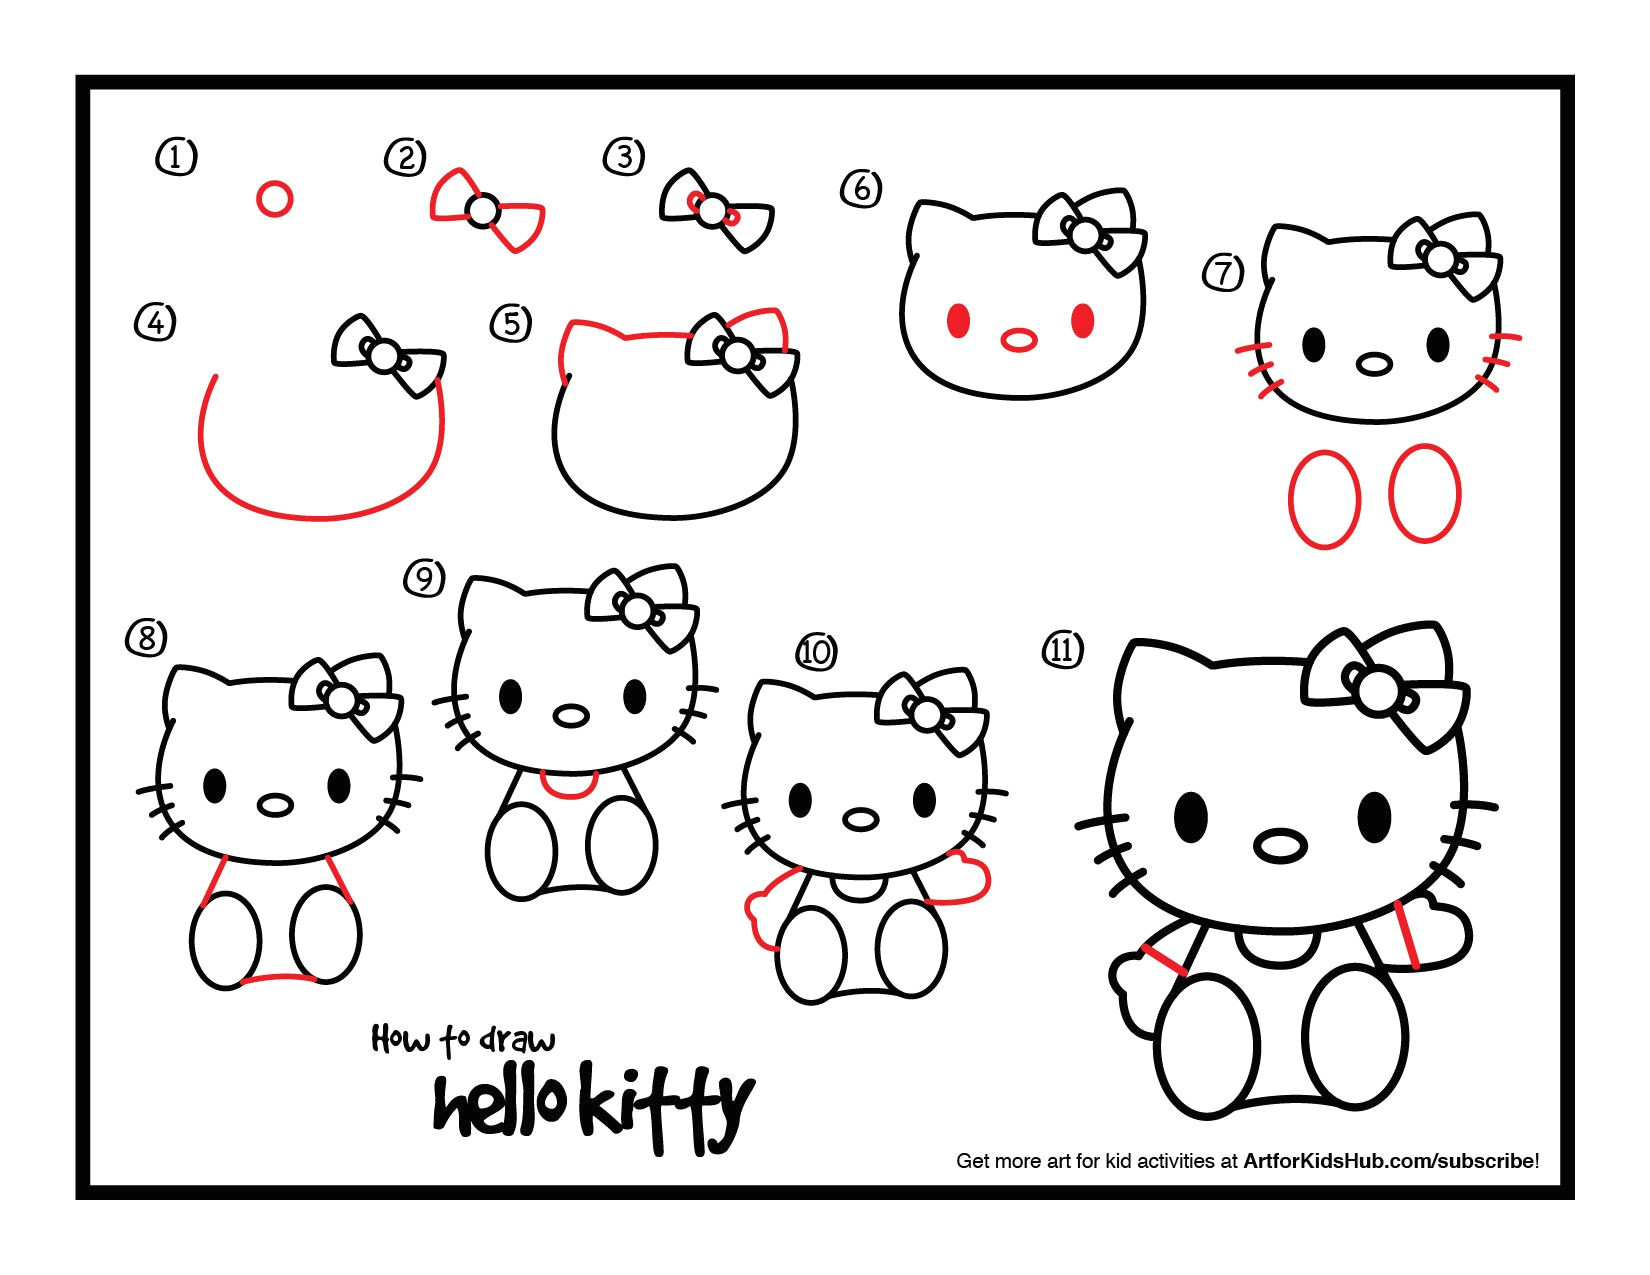 Easy Drawing Hello Kitty How to Draw Hello Kitty Easy Drawing Pinterest Drawings Hello